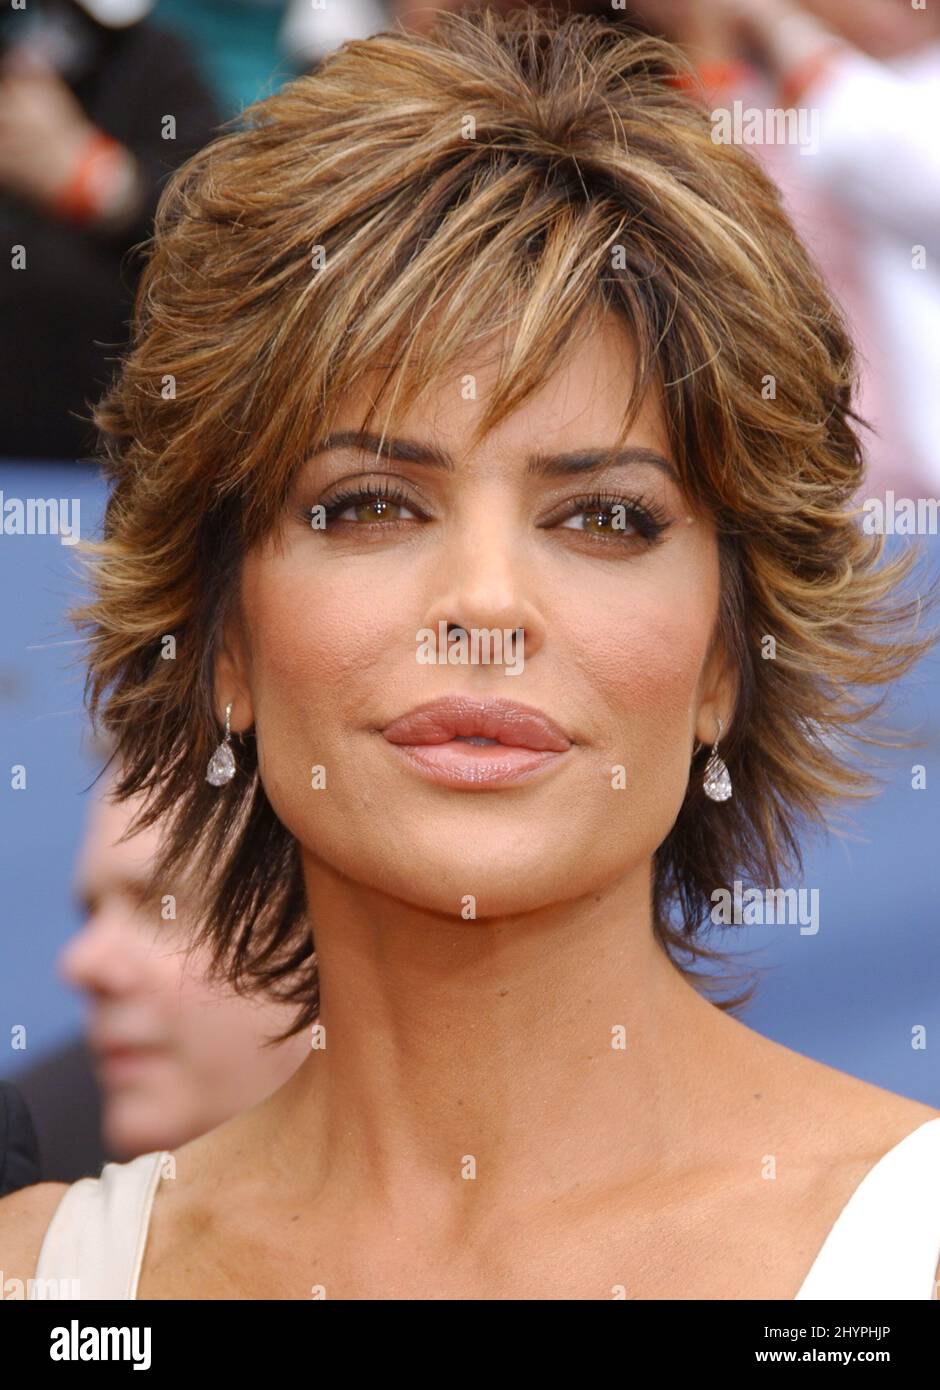 Lisa Rinna Attends The 33rd Annual Daytime Emmy Awards At The Kodak